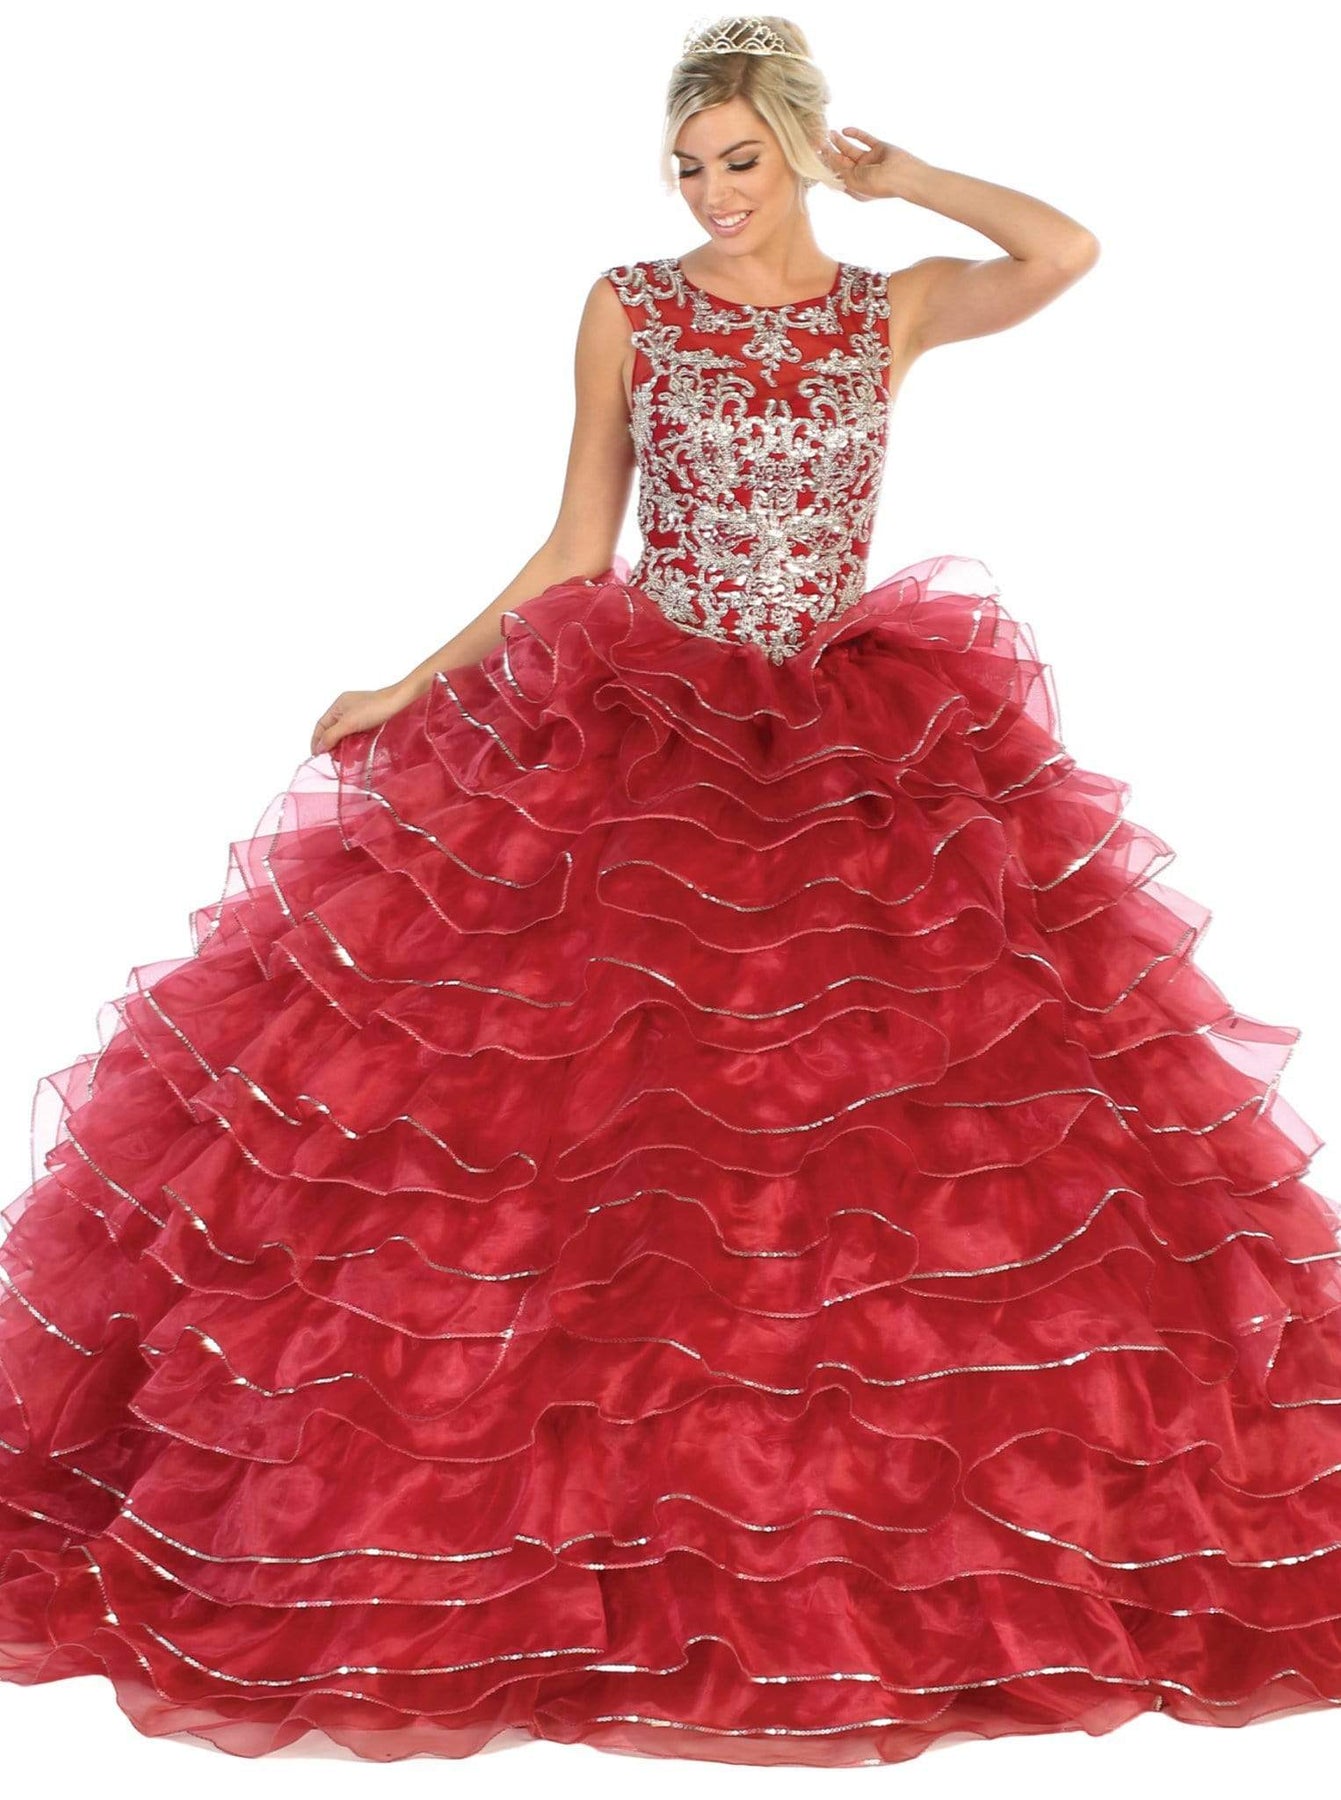 May Queen - LK125 Embellished Scoop Tiered Quinceanera Special Occasion Dress 4 / Burgundy